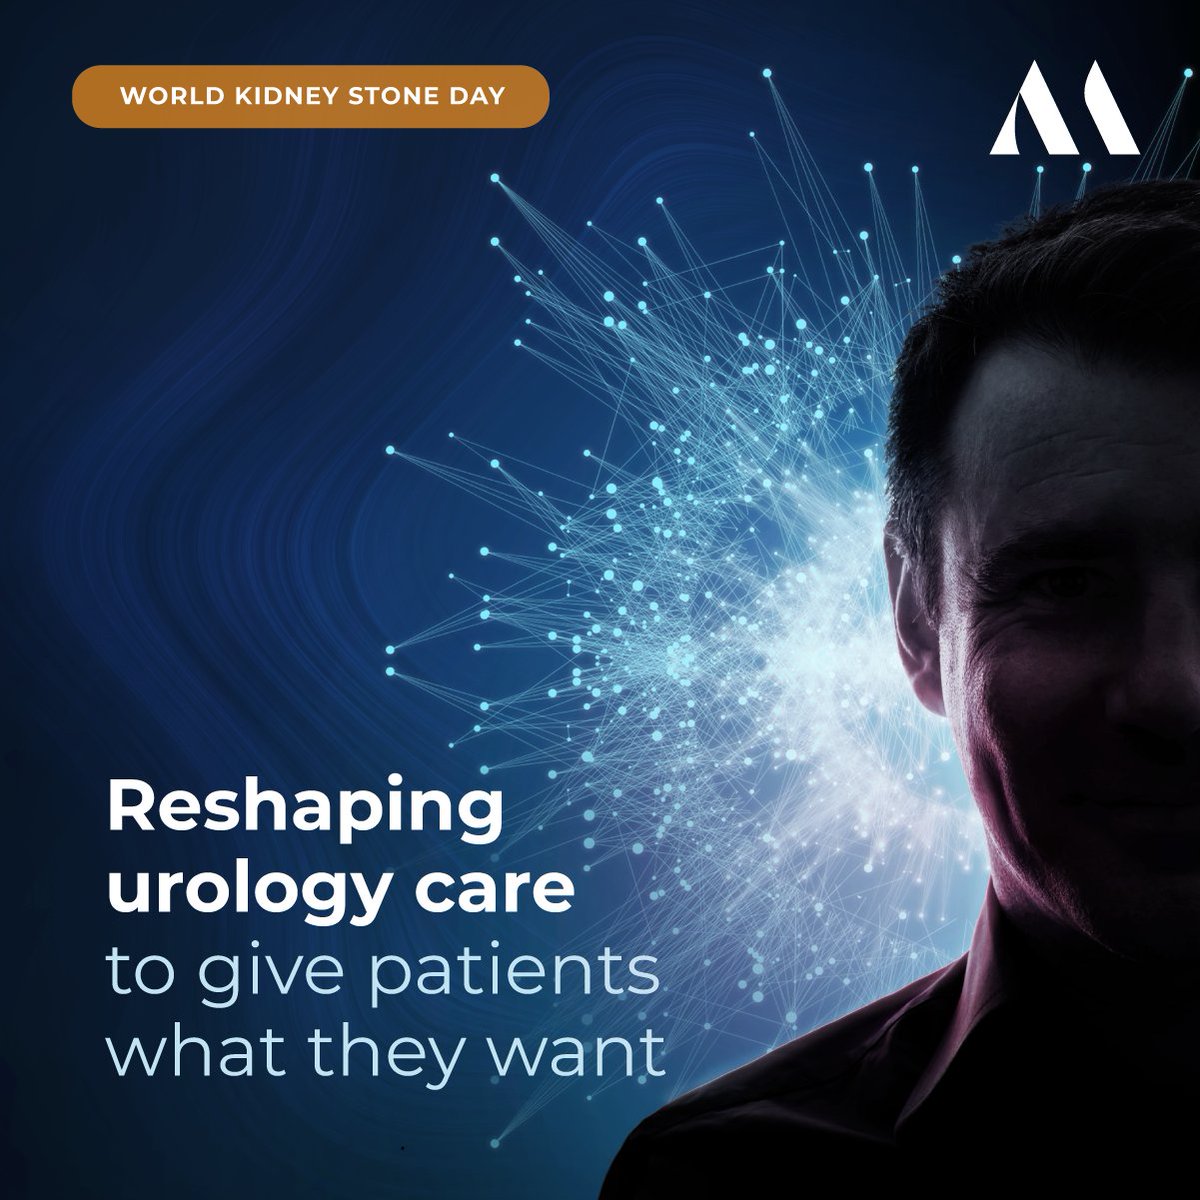 Our patients are at the heart of everything we do. With products that enable strong treatment outcomes, an extensive network of urologists and a robust digital patient community, we’re bringing #patientcentric care to the next level. 

The best part? We’re just getting started.